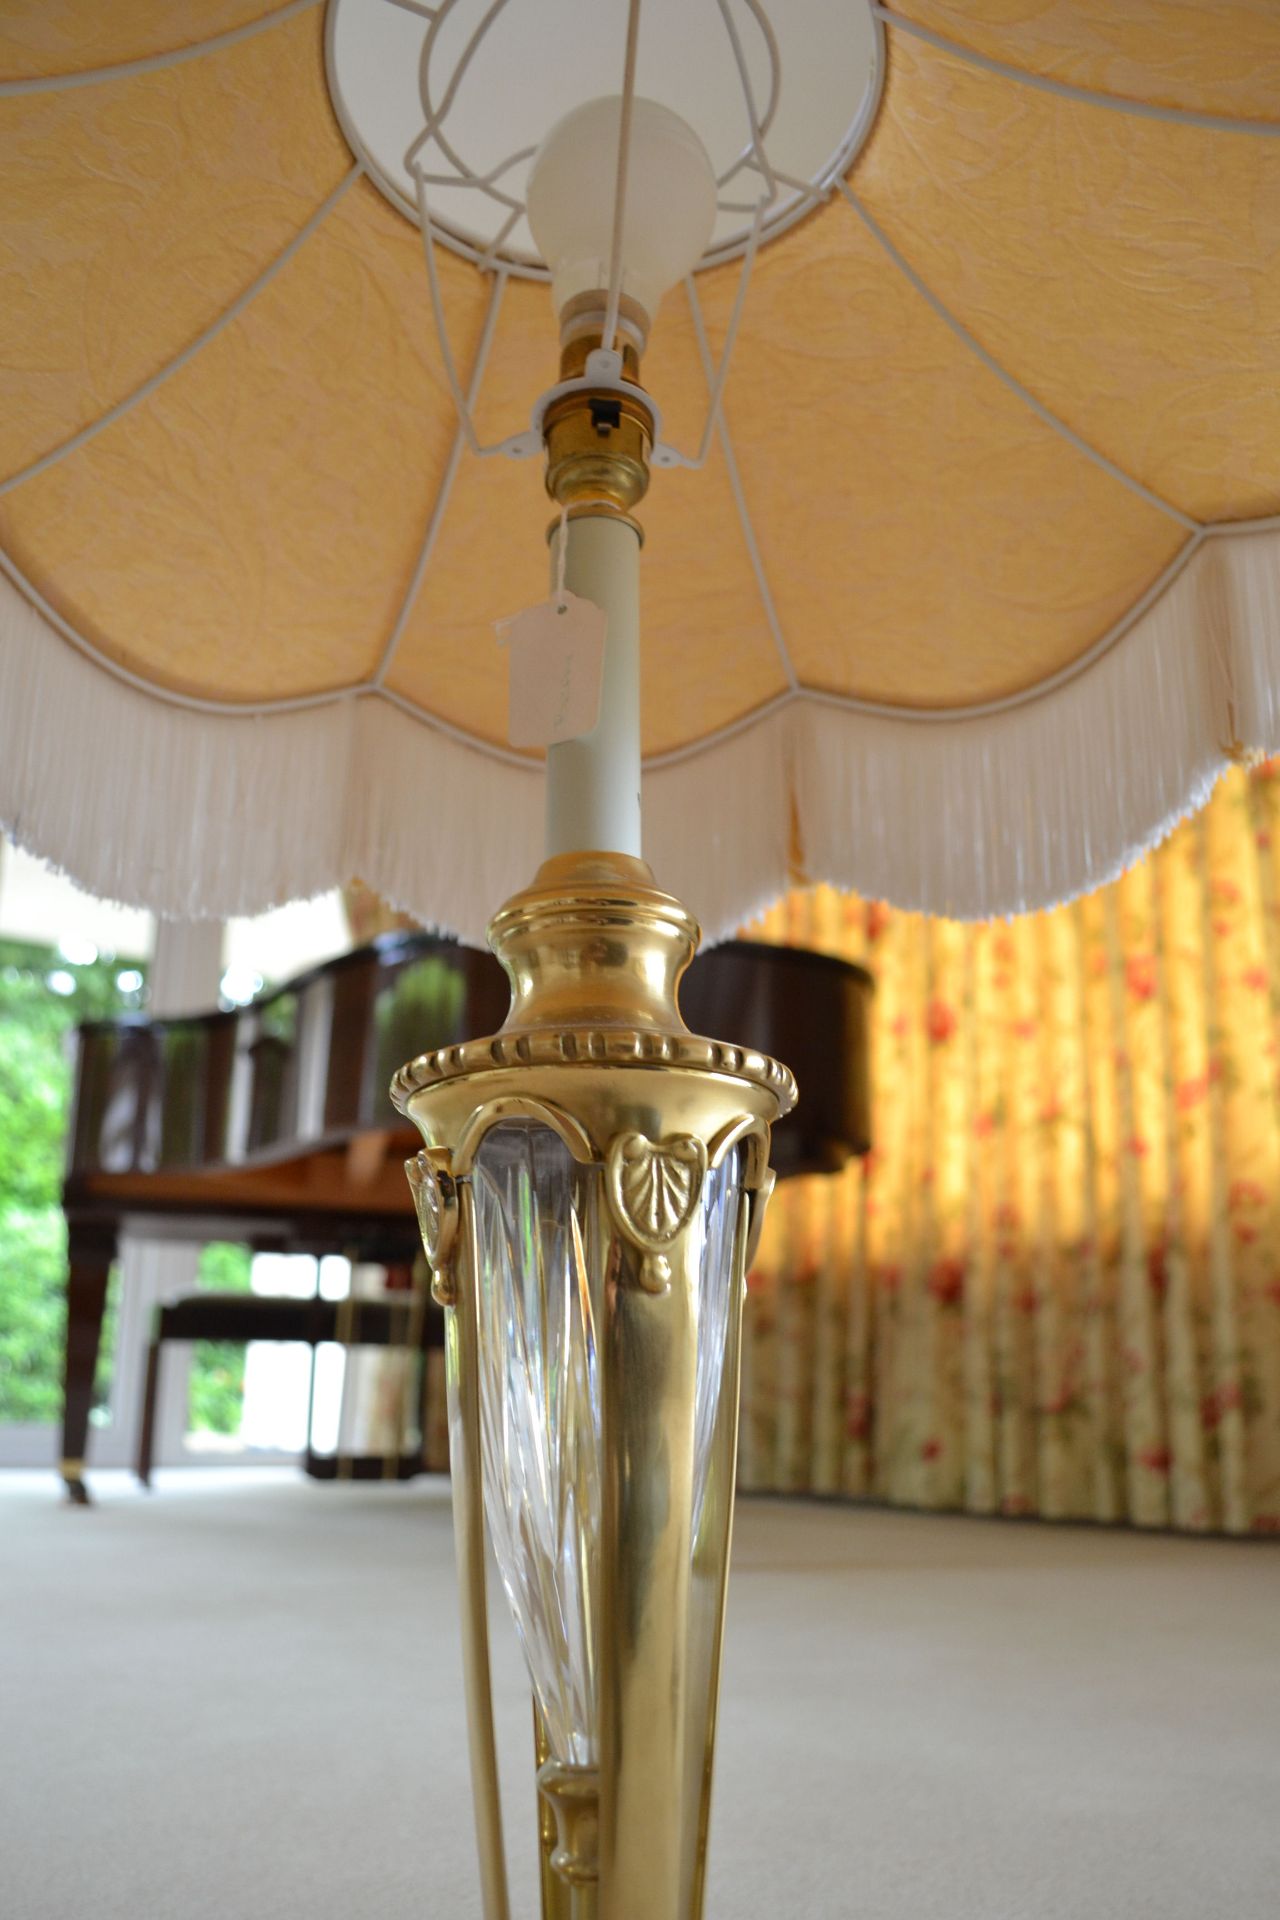 1 x Art Deco Style Lamp in Gold - CL226 - Location: Knutsford WA16 - NO VAT ON THE HAMMER Includes - Image 7 of 7